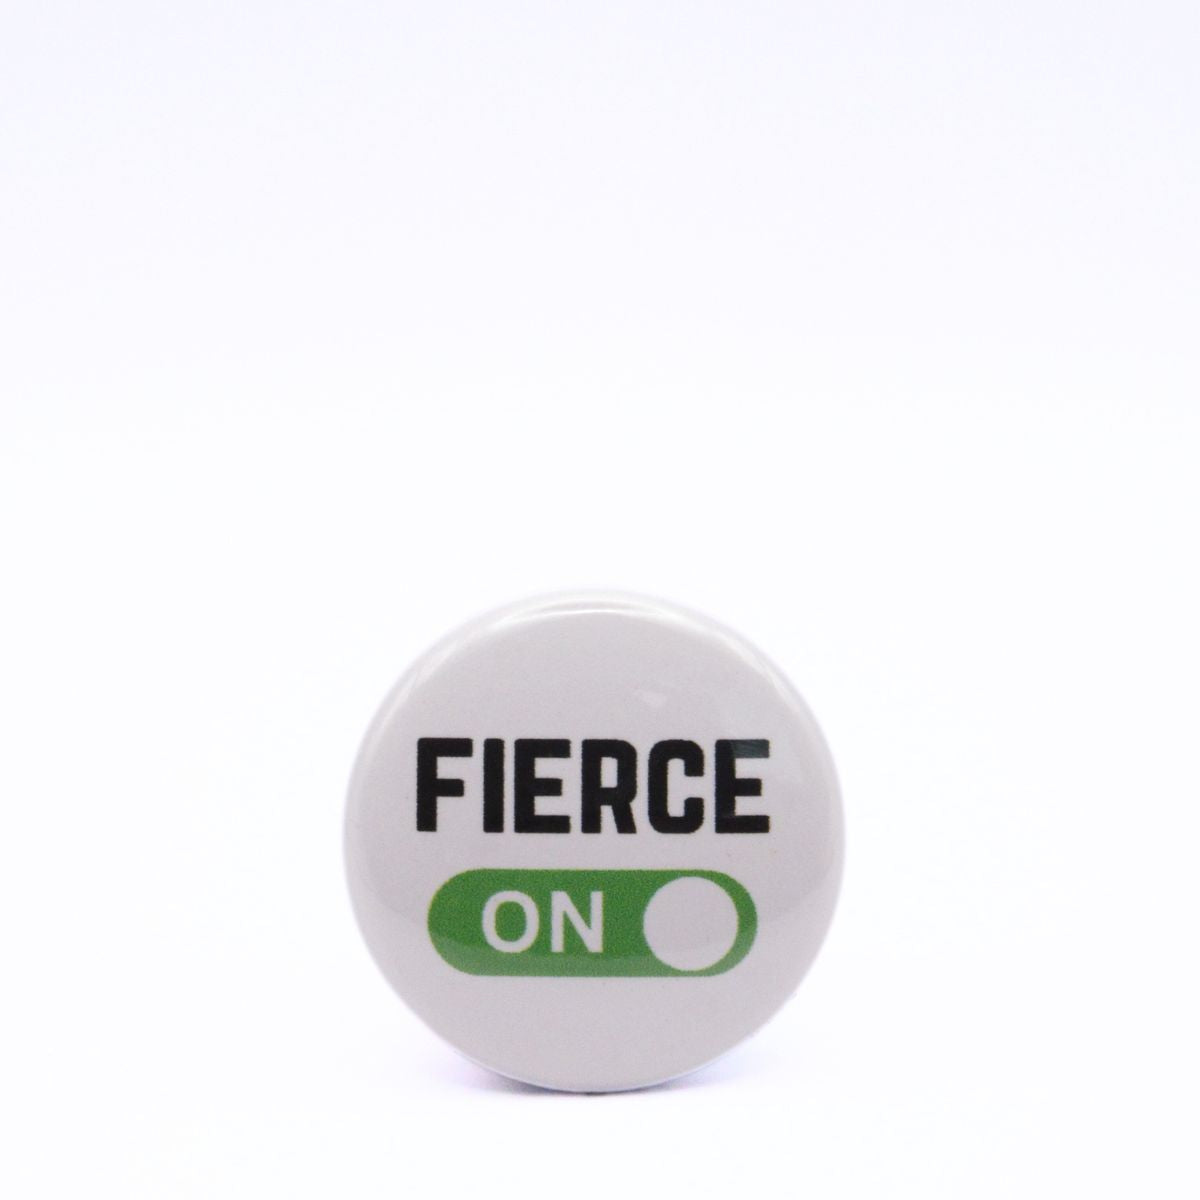 BooBooRoo Pinback Button (i.e. button, badge, pin) displaying fierce mode is on. Green background for mode indicator.